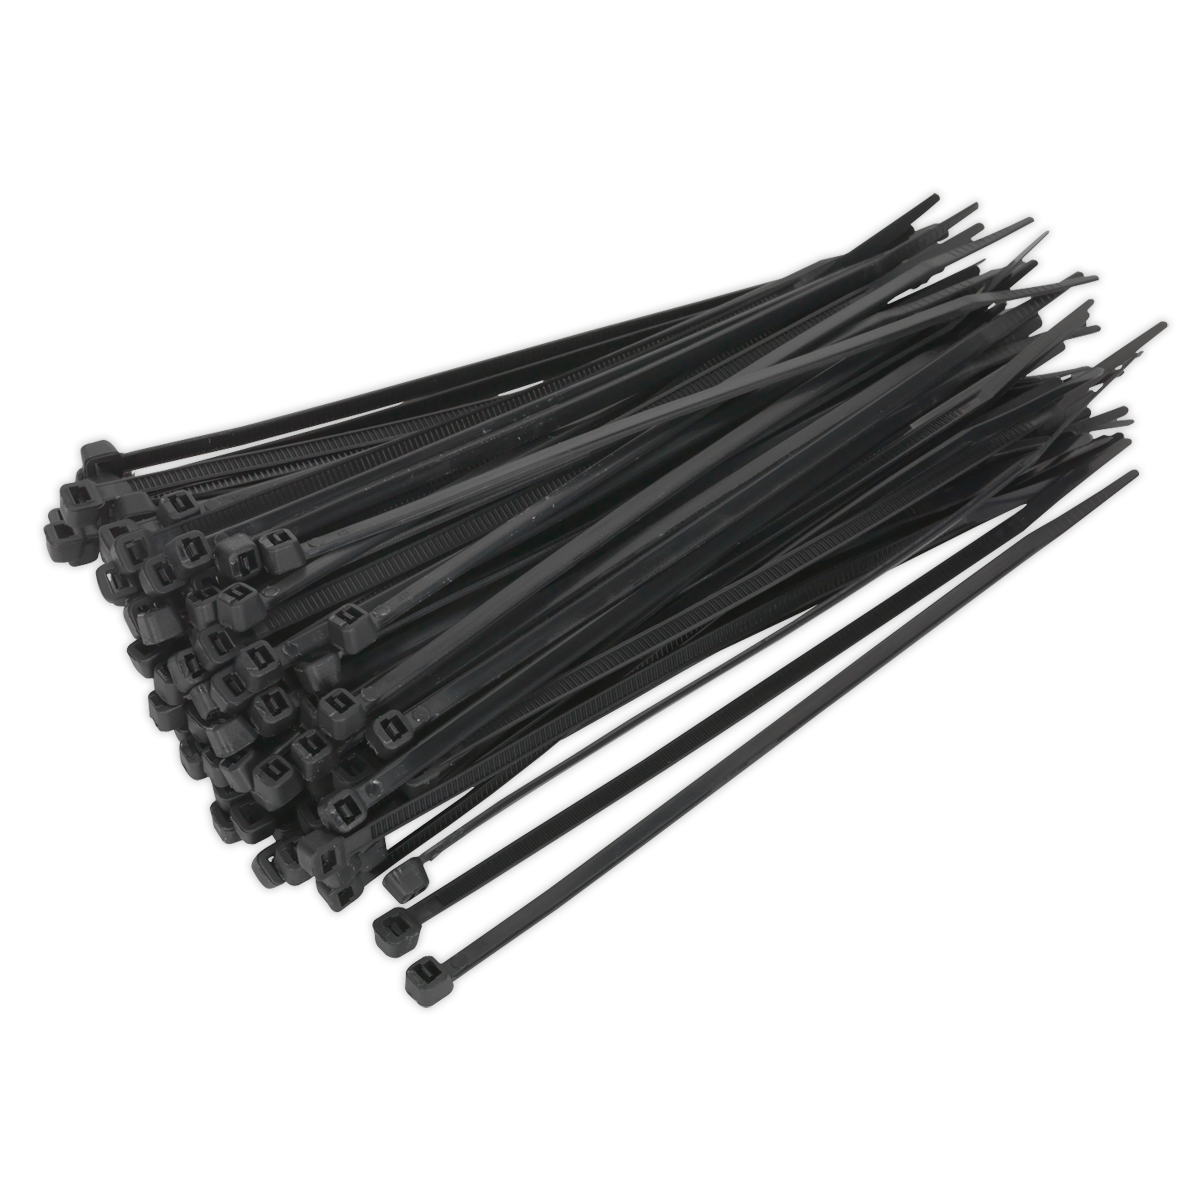 Cable Tie 150 x 3.6mm Black Pack of 100 - CT15036P100 - Farming Parts